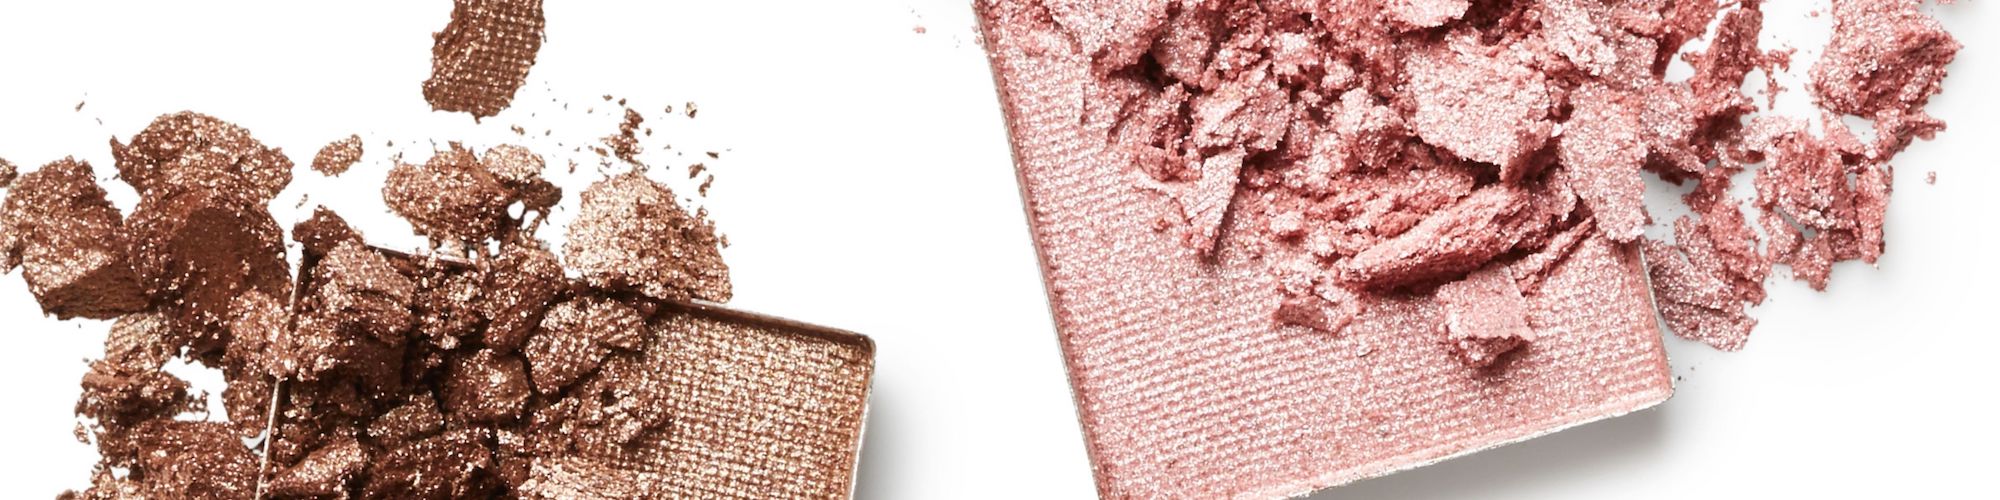 Mineral, talc free eyeshadow pan swatches in pink and brown from InClinic Cosmetics